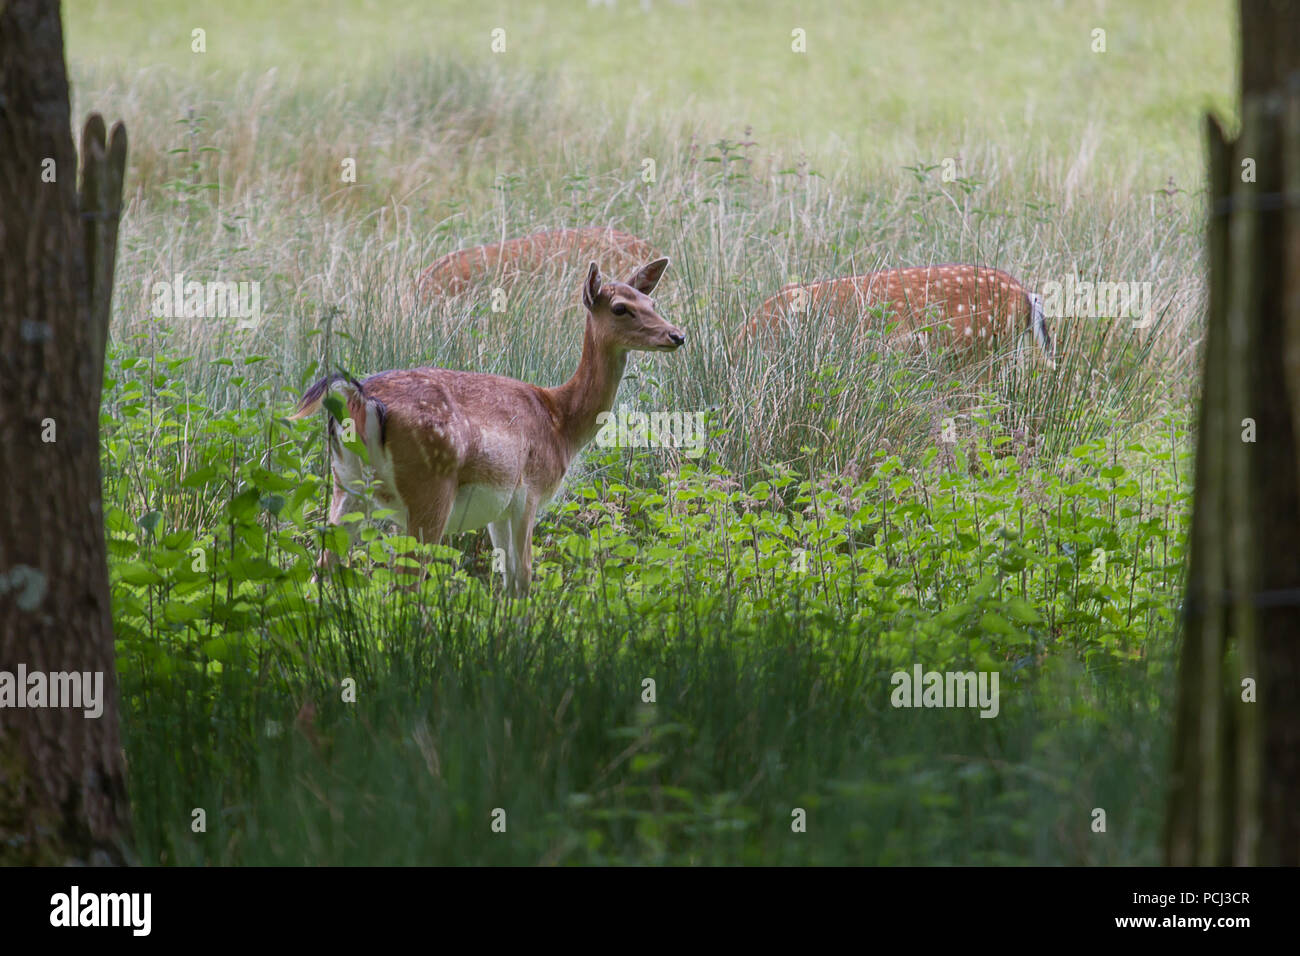 Photo study of alert female Fallow deer in long grass with others grazing in the back ground Stock Photo